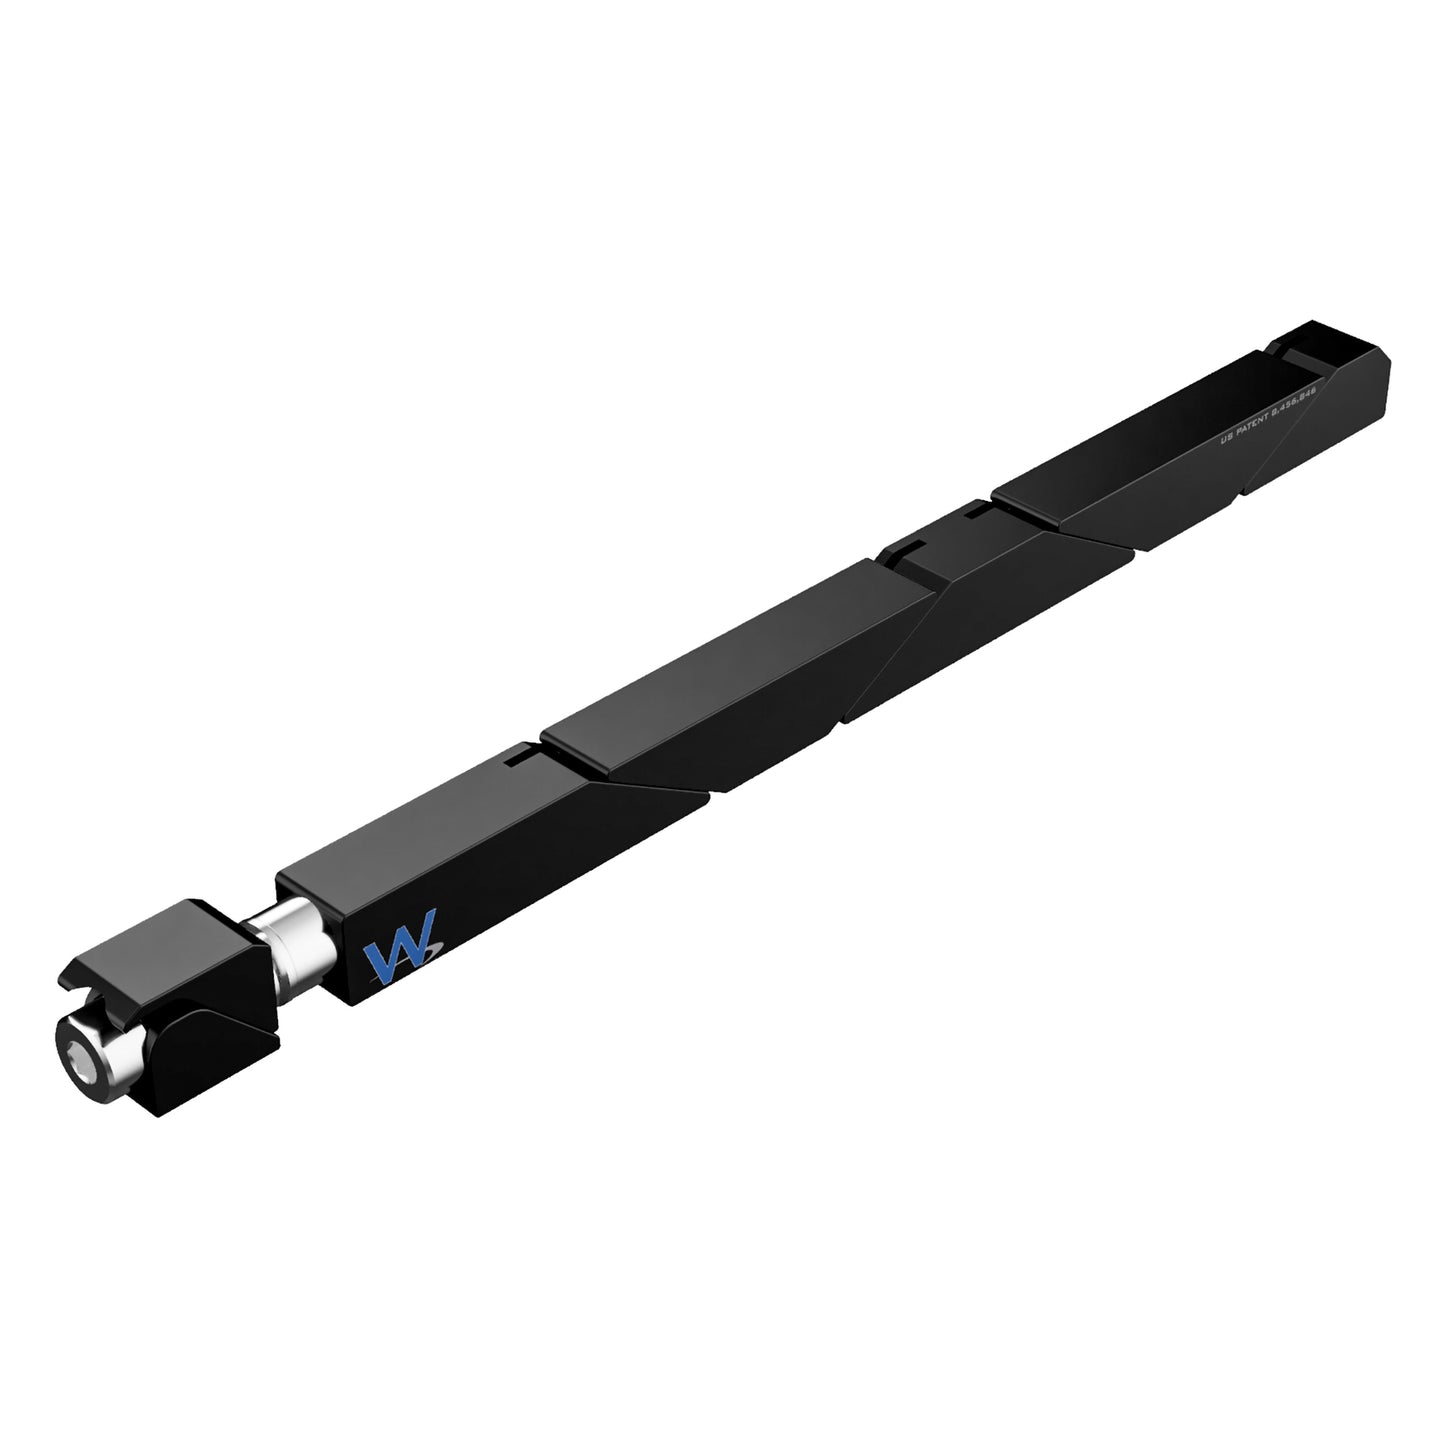 SW7-455-270-250 Max Force Belleville Wedgelock, segmented long rectulangular hardware component, Black Anodized Finish